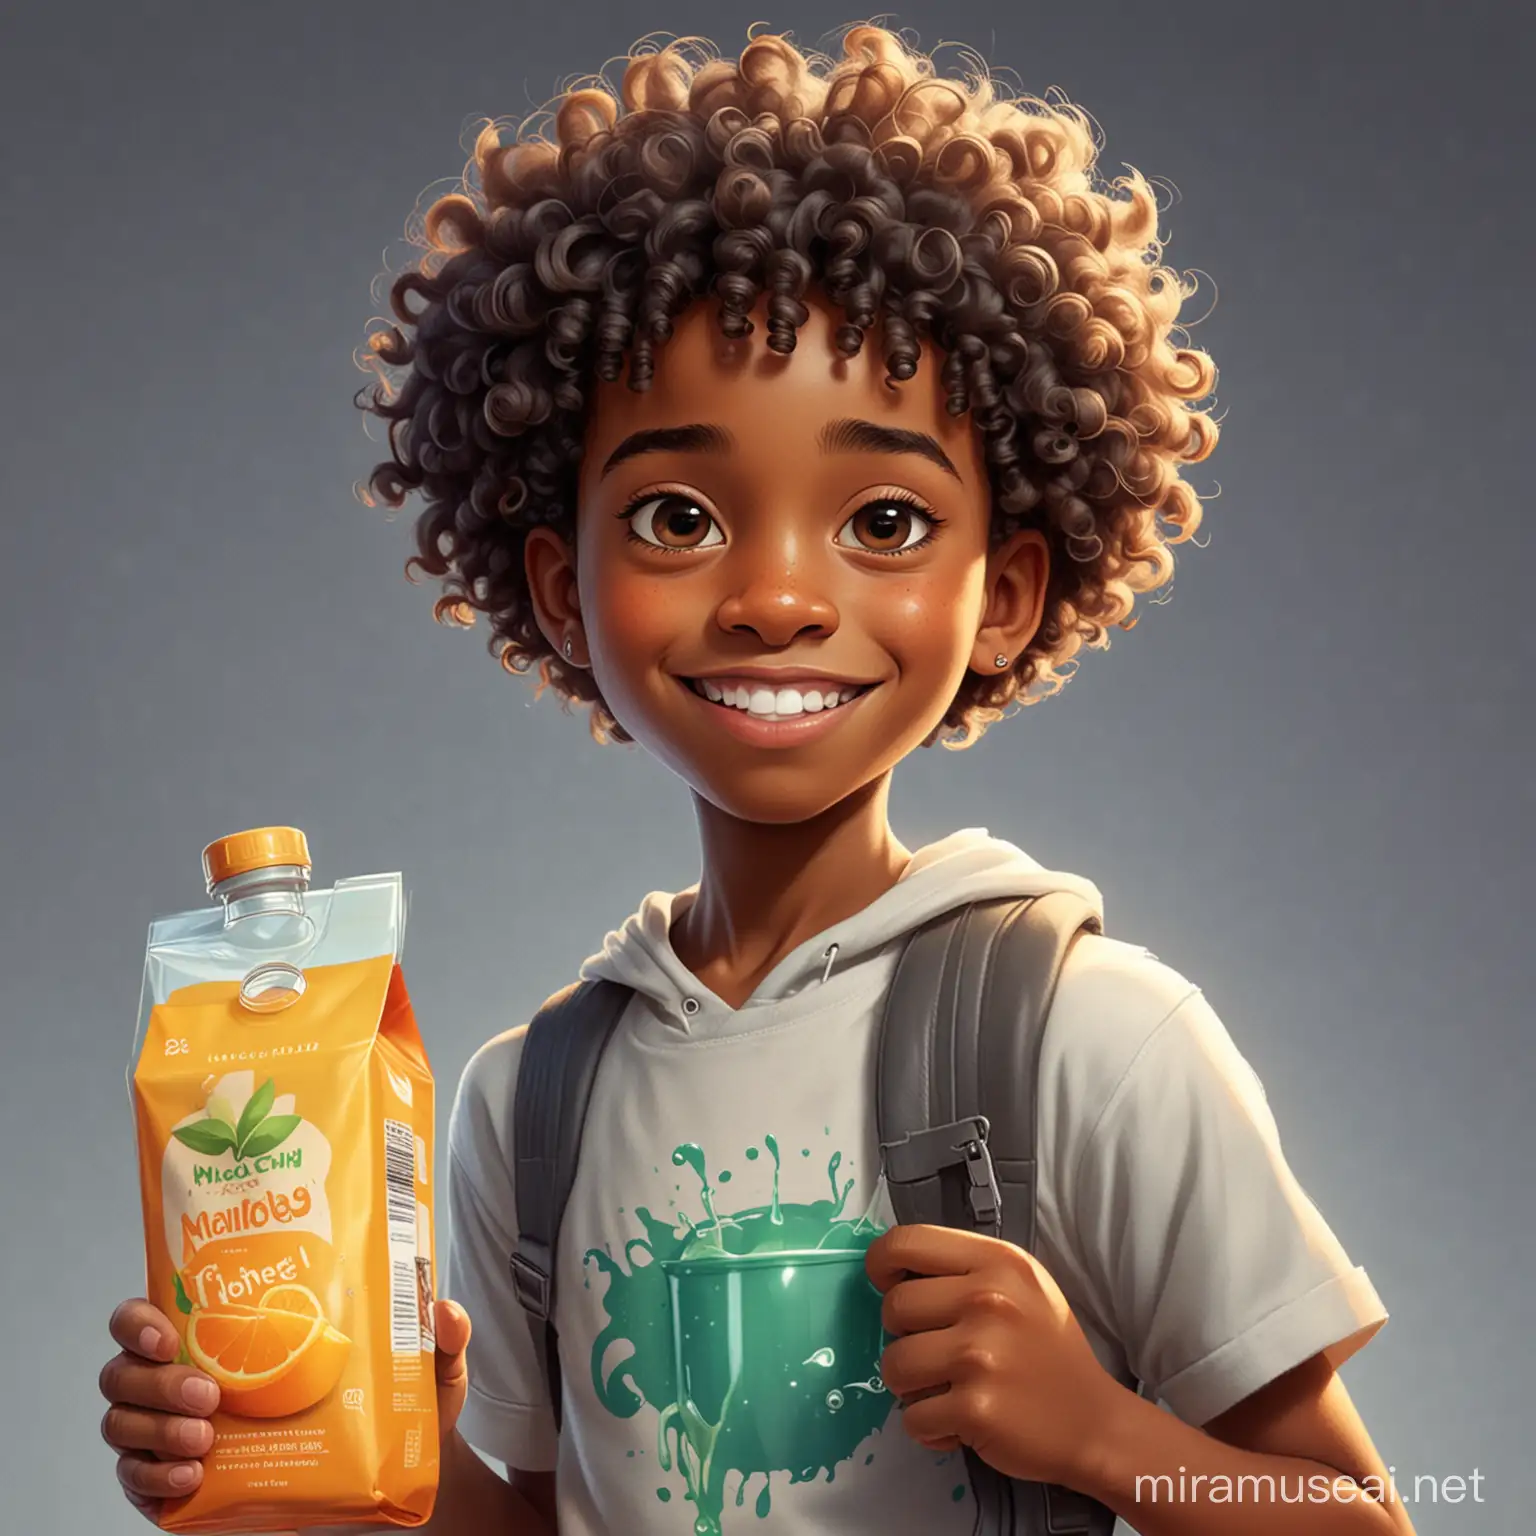 Cheerful 12YearOld Black Boy Holding a Bag and Juice